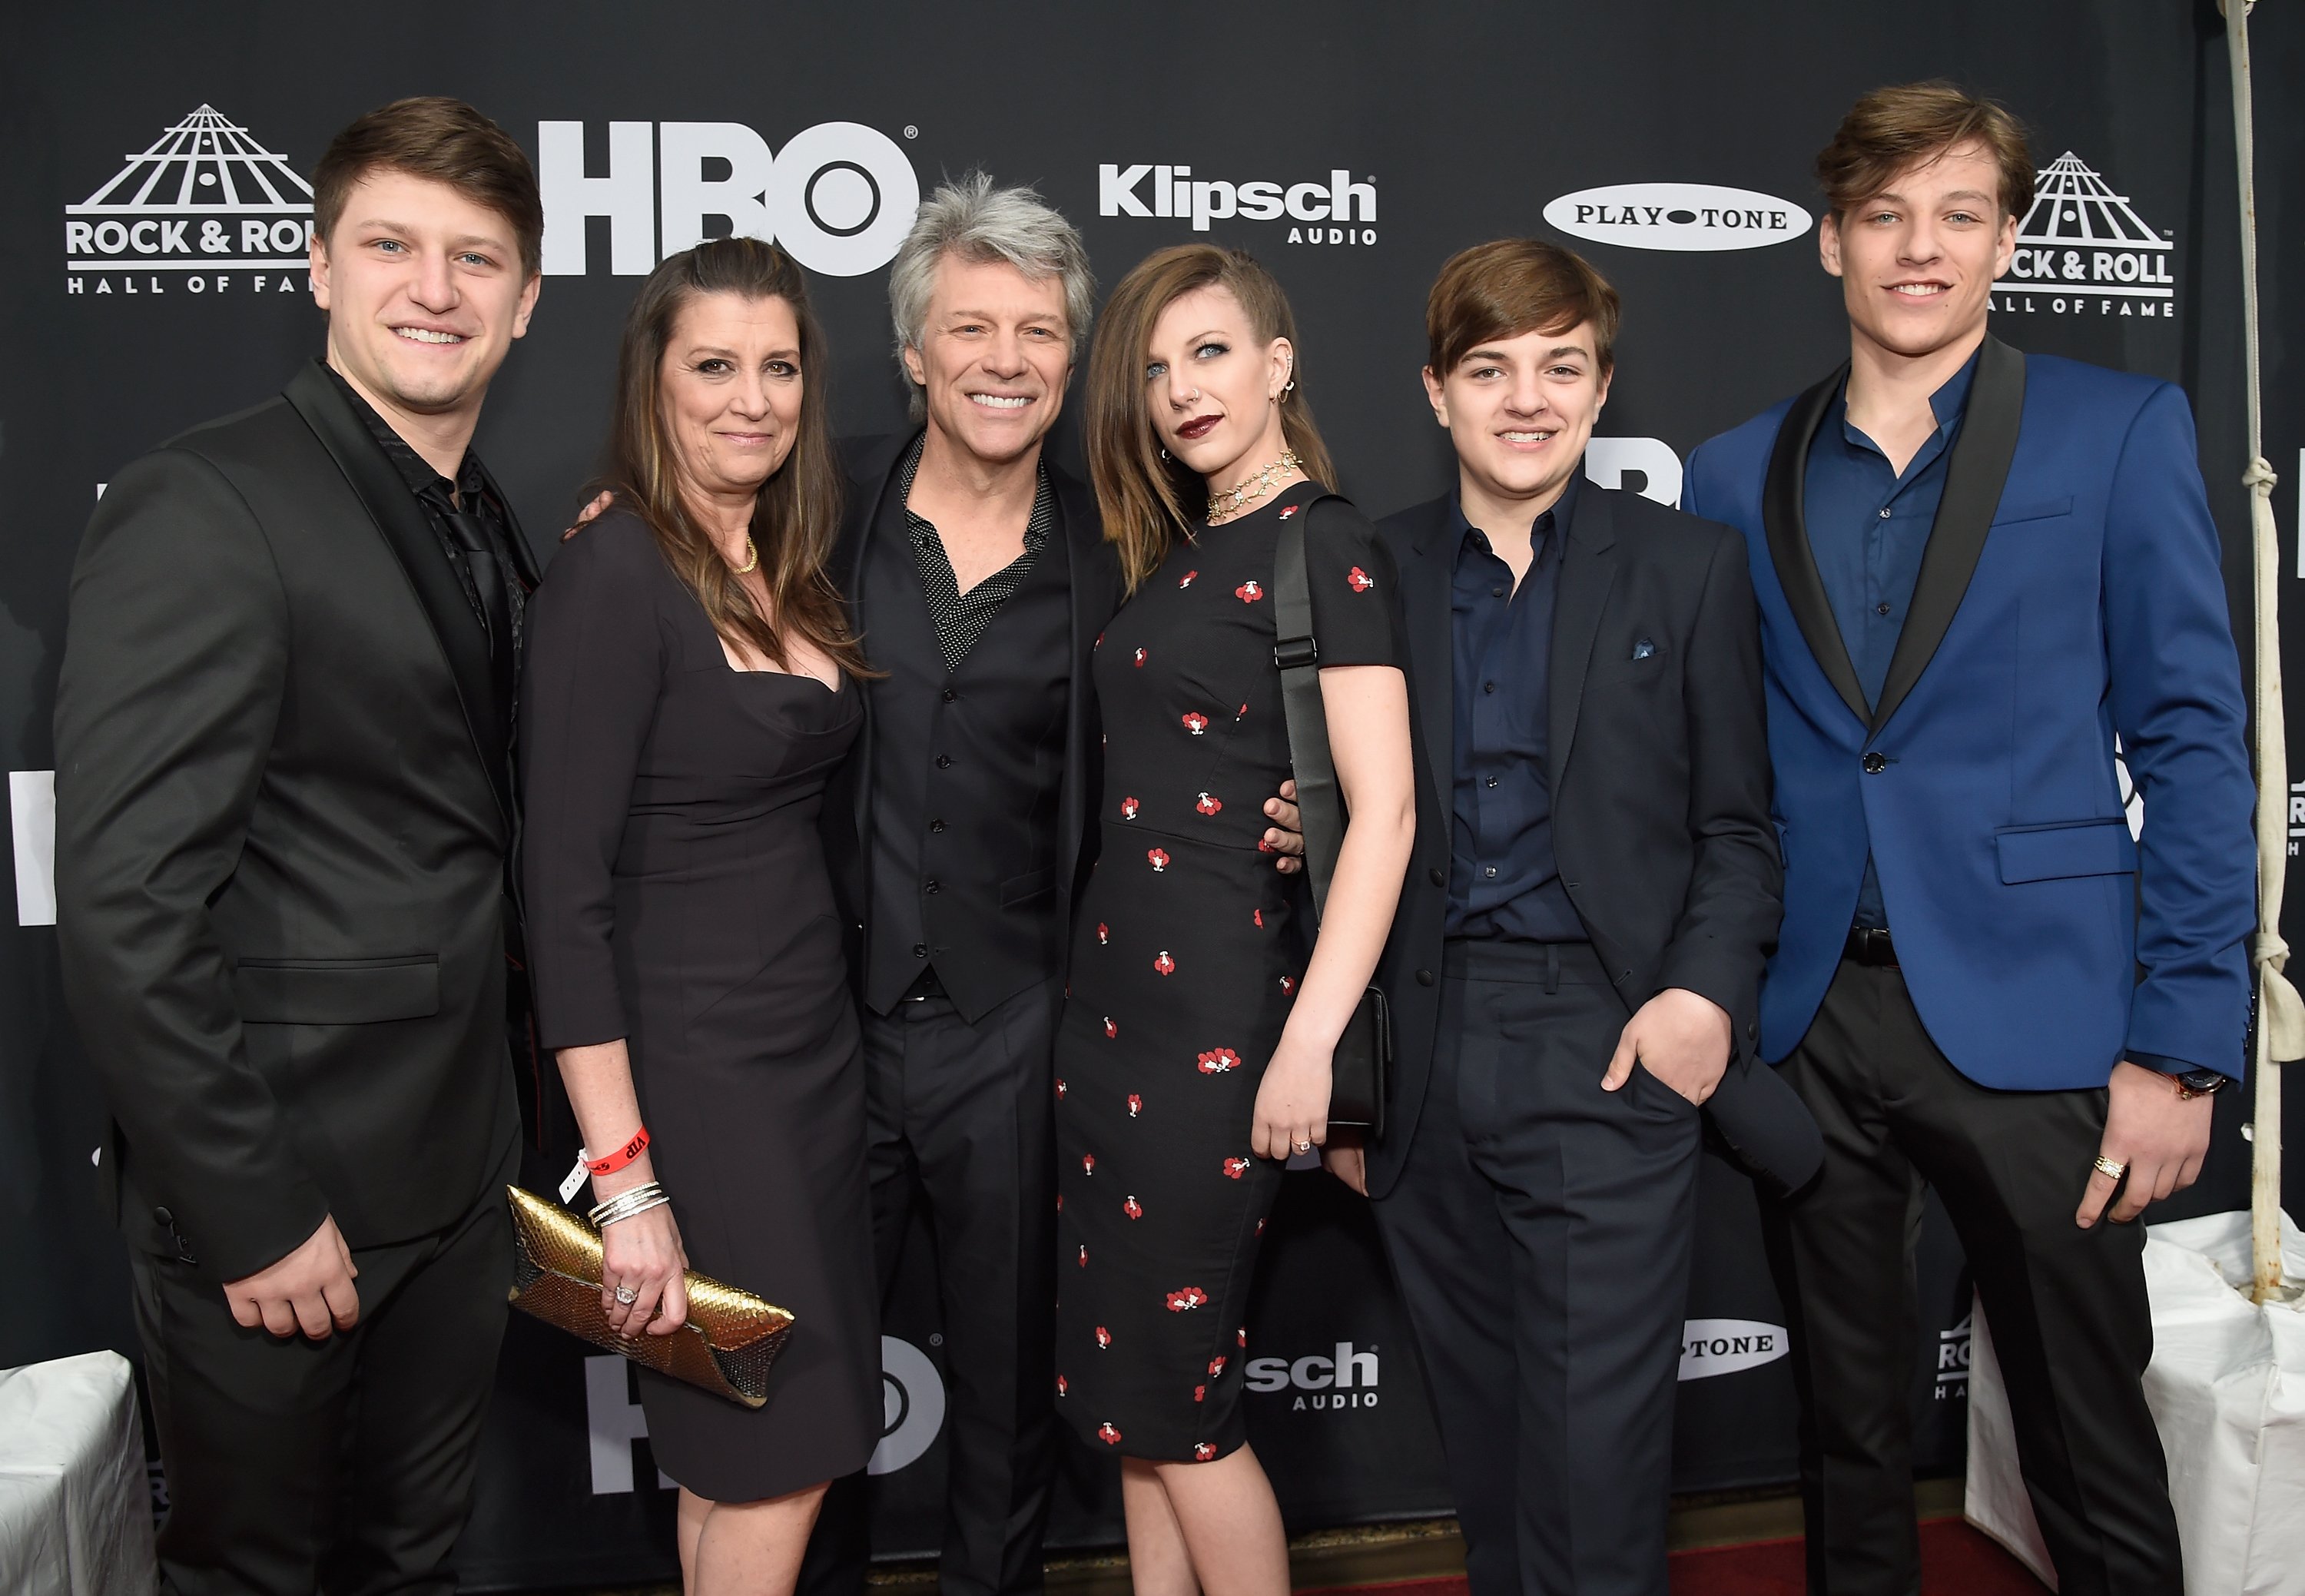 Jesse Bongiovi, Dorothea Hurley, Jon Bon Jovi, Stephanie Bongiovi, Romeo Bongiovi, and Jacob Bongiovi at the 33rd Annual Rock & Roll Hall of Fame Induction Ceremony on April 14, 2018, in Cleveland | Source: Getty Images